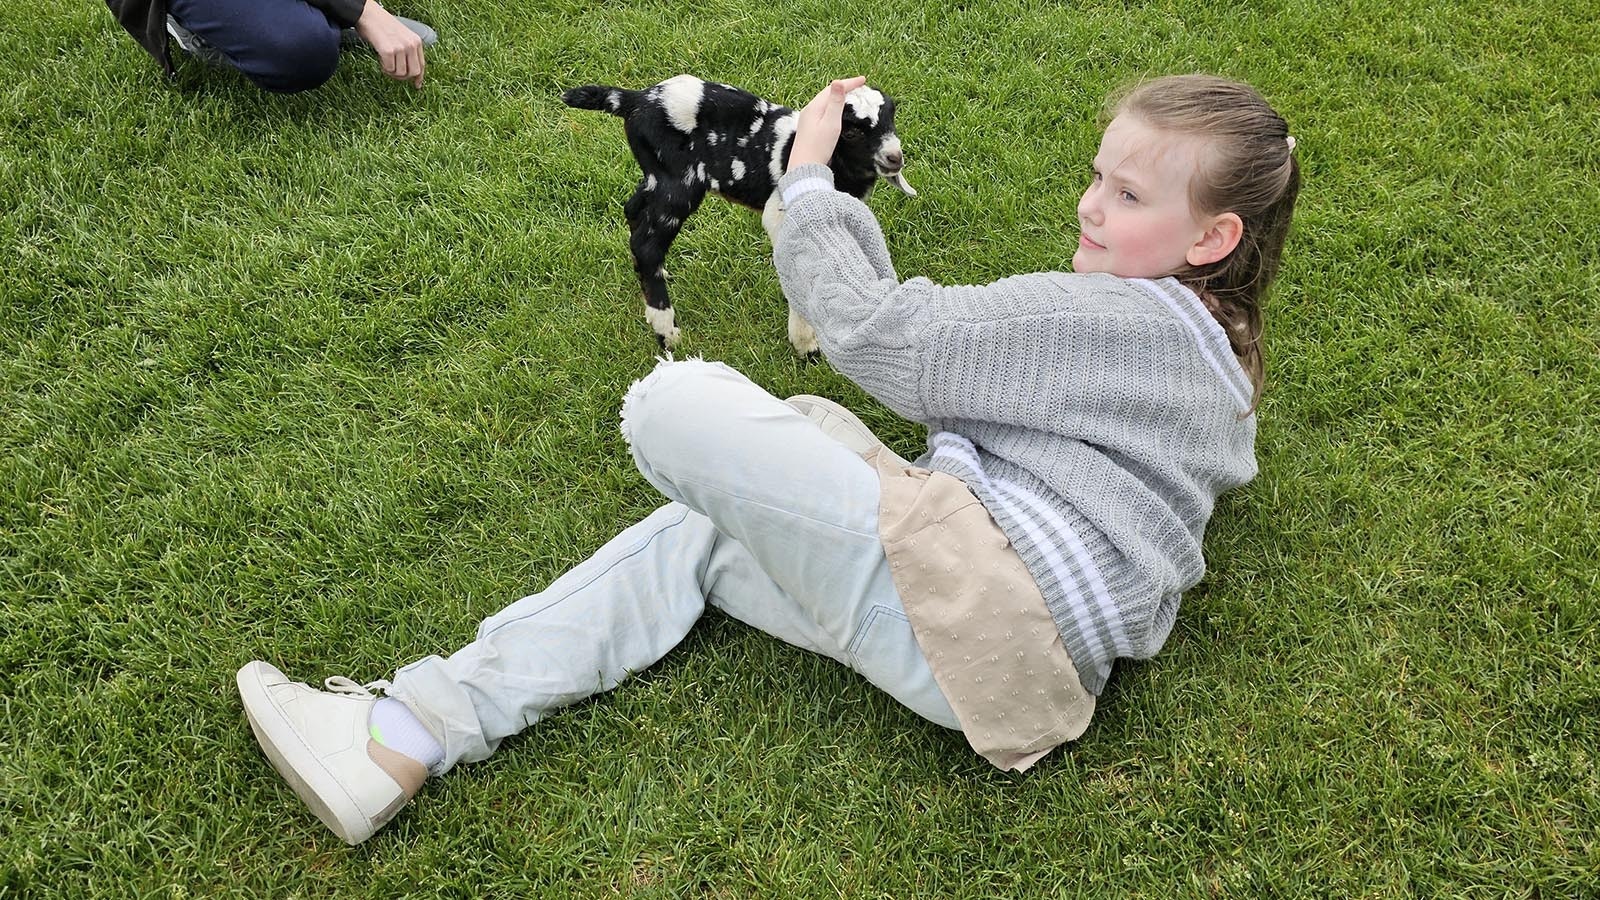 Gwendolyn Camphouse, 9, pets a baby goat at Sun Valley Park. Her family says Camphouse is "obsessed" with any animal that lives on a farm. That now includes cute, floppy-eared Nubian goats.